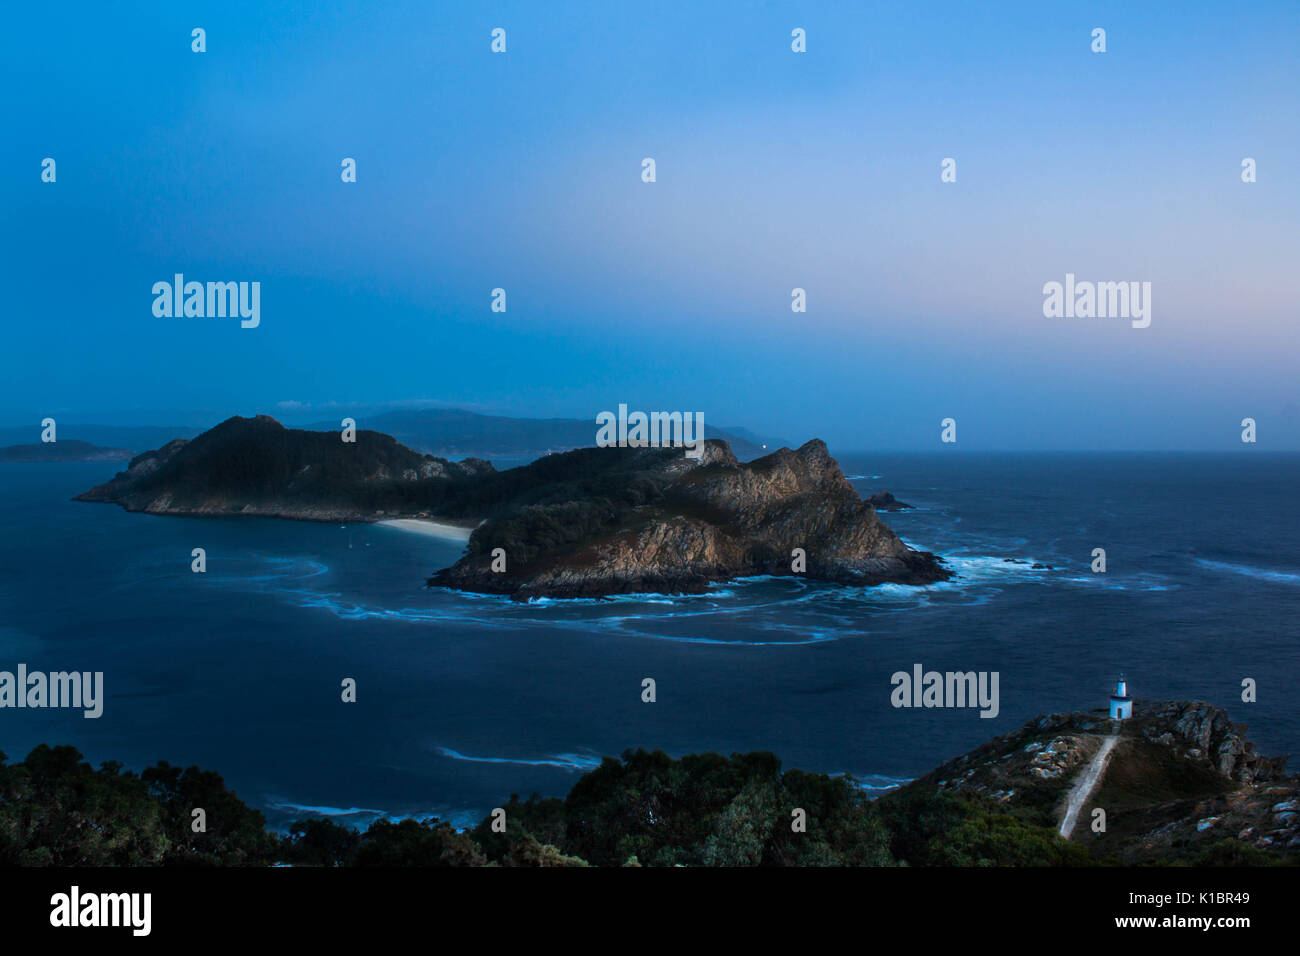 Night landscape photography from Cies islands in Galicia Spain, aerial view Stock Photo